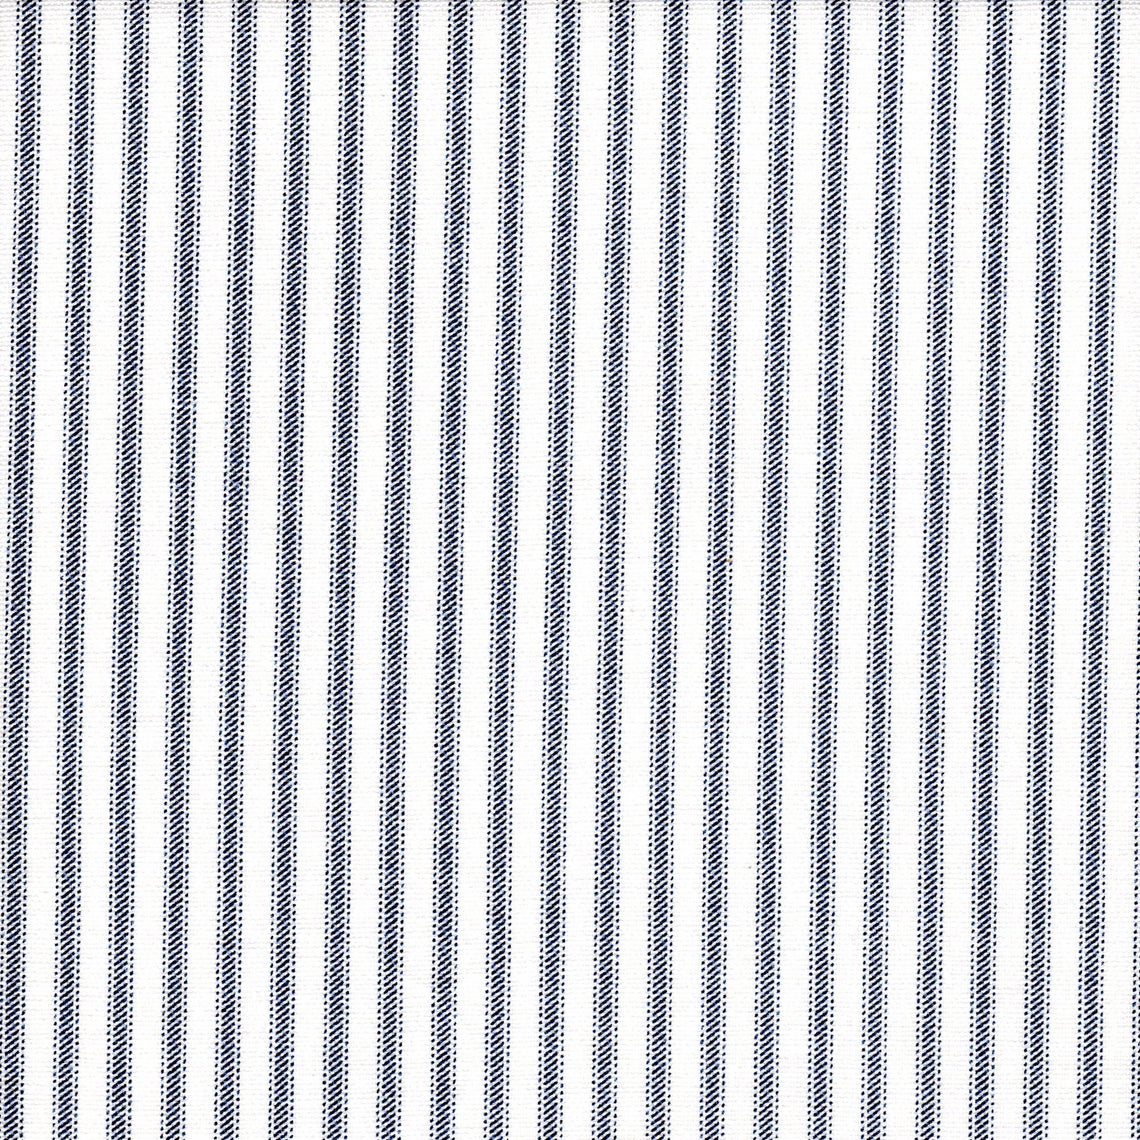 tie-up valance in classic navy blue ticking stripe on white